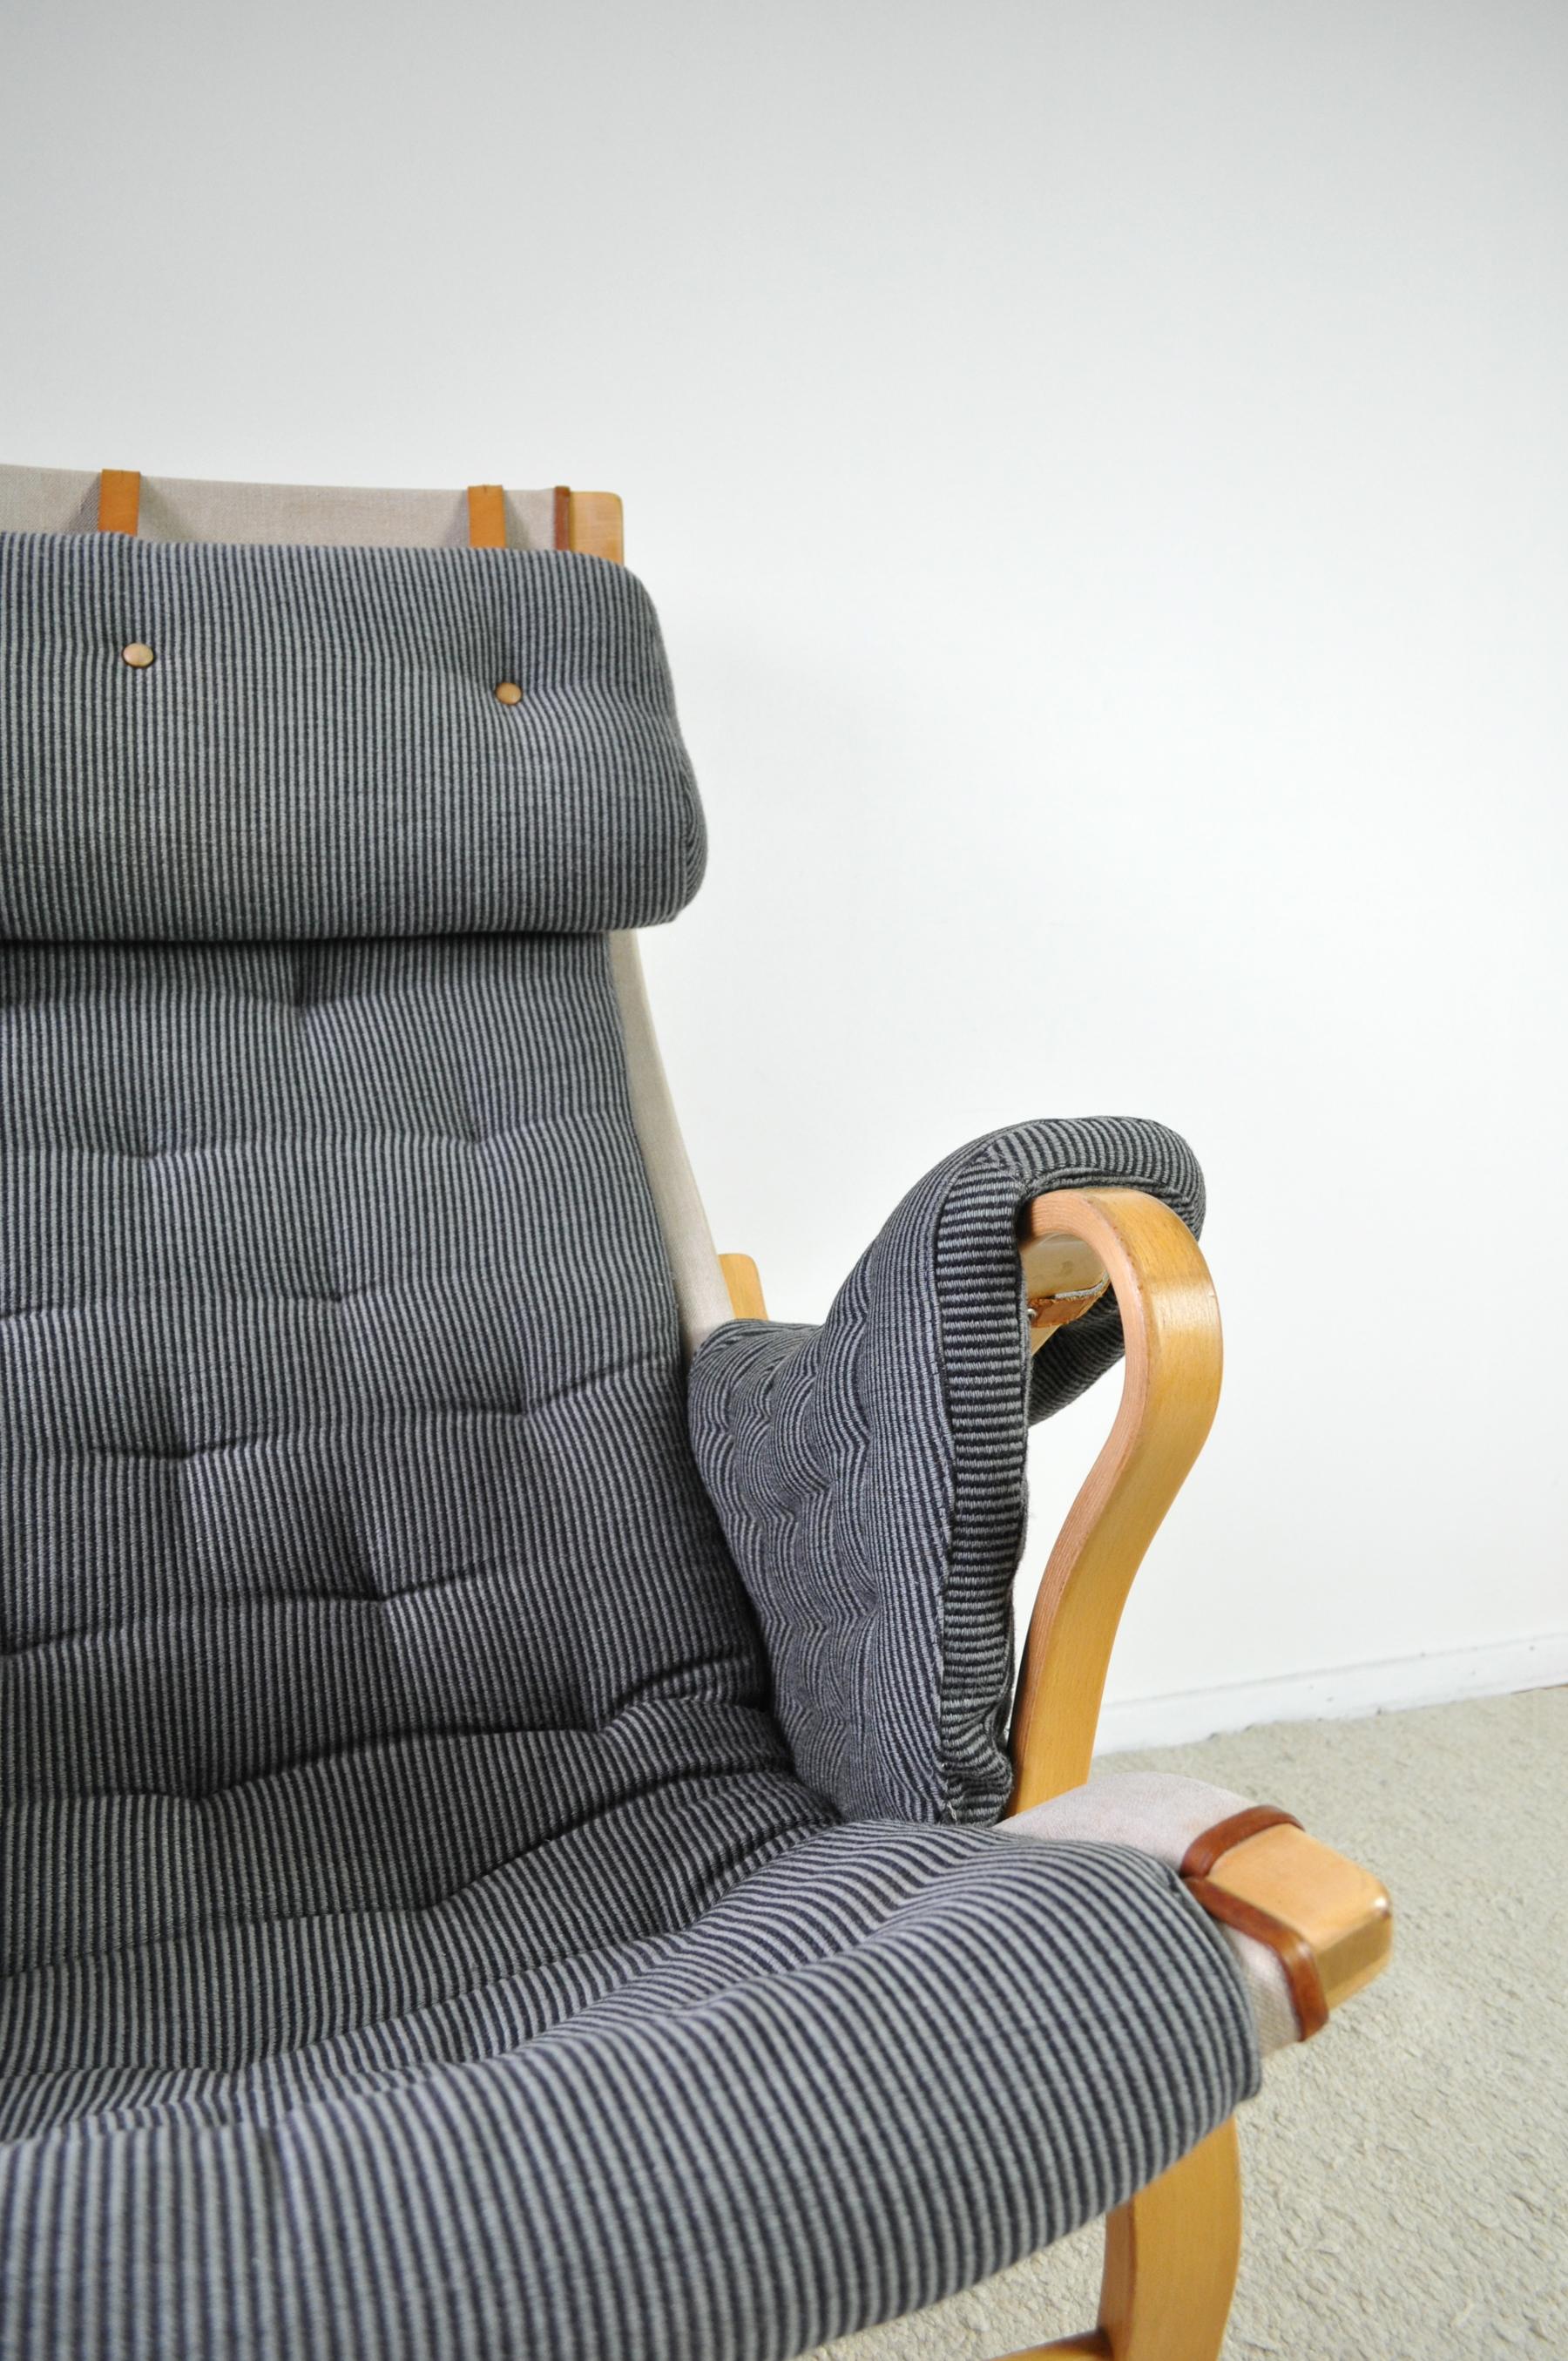 Bruno Mathsson Lounge Chair Pernilla 69 for DUX, Sweden For Sale 1